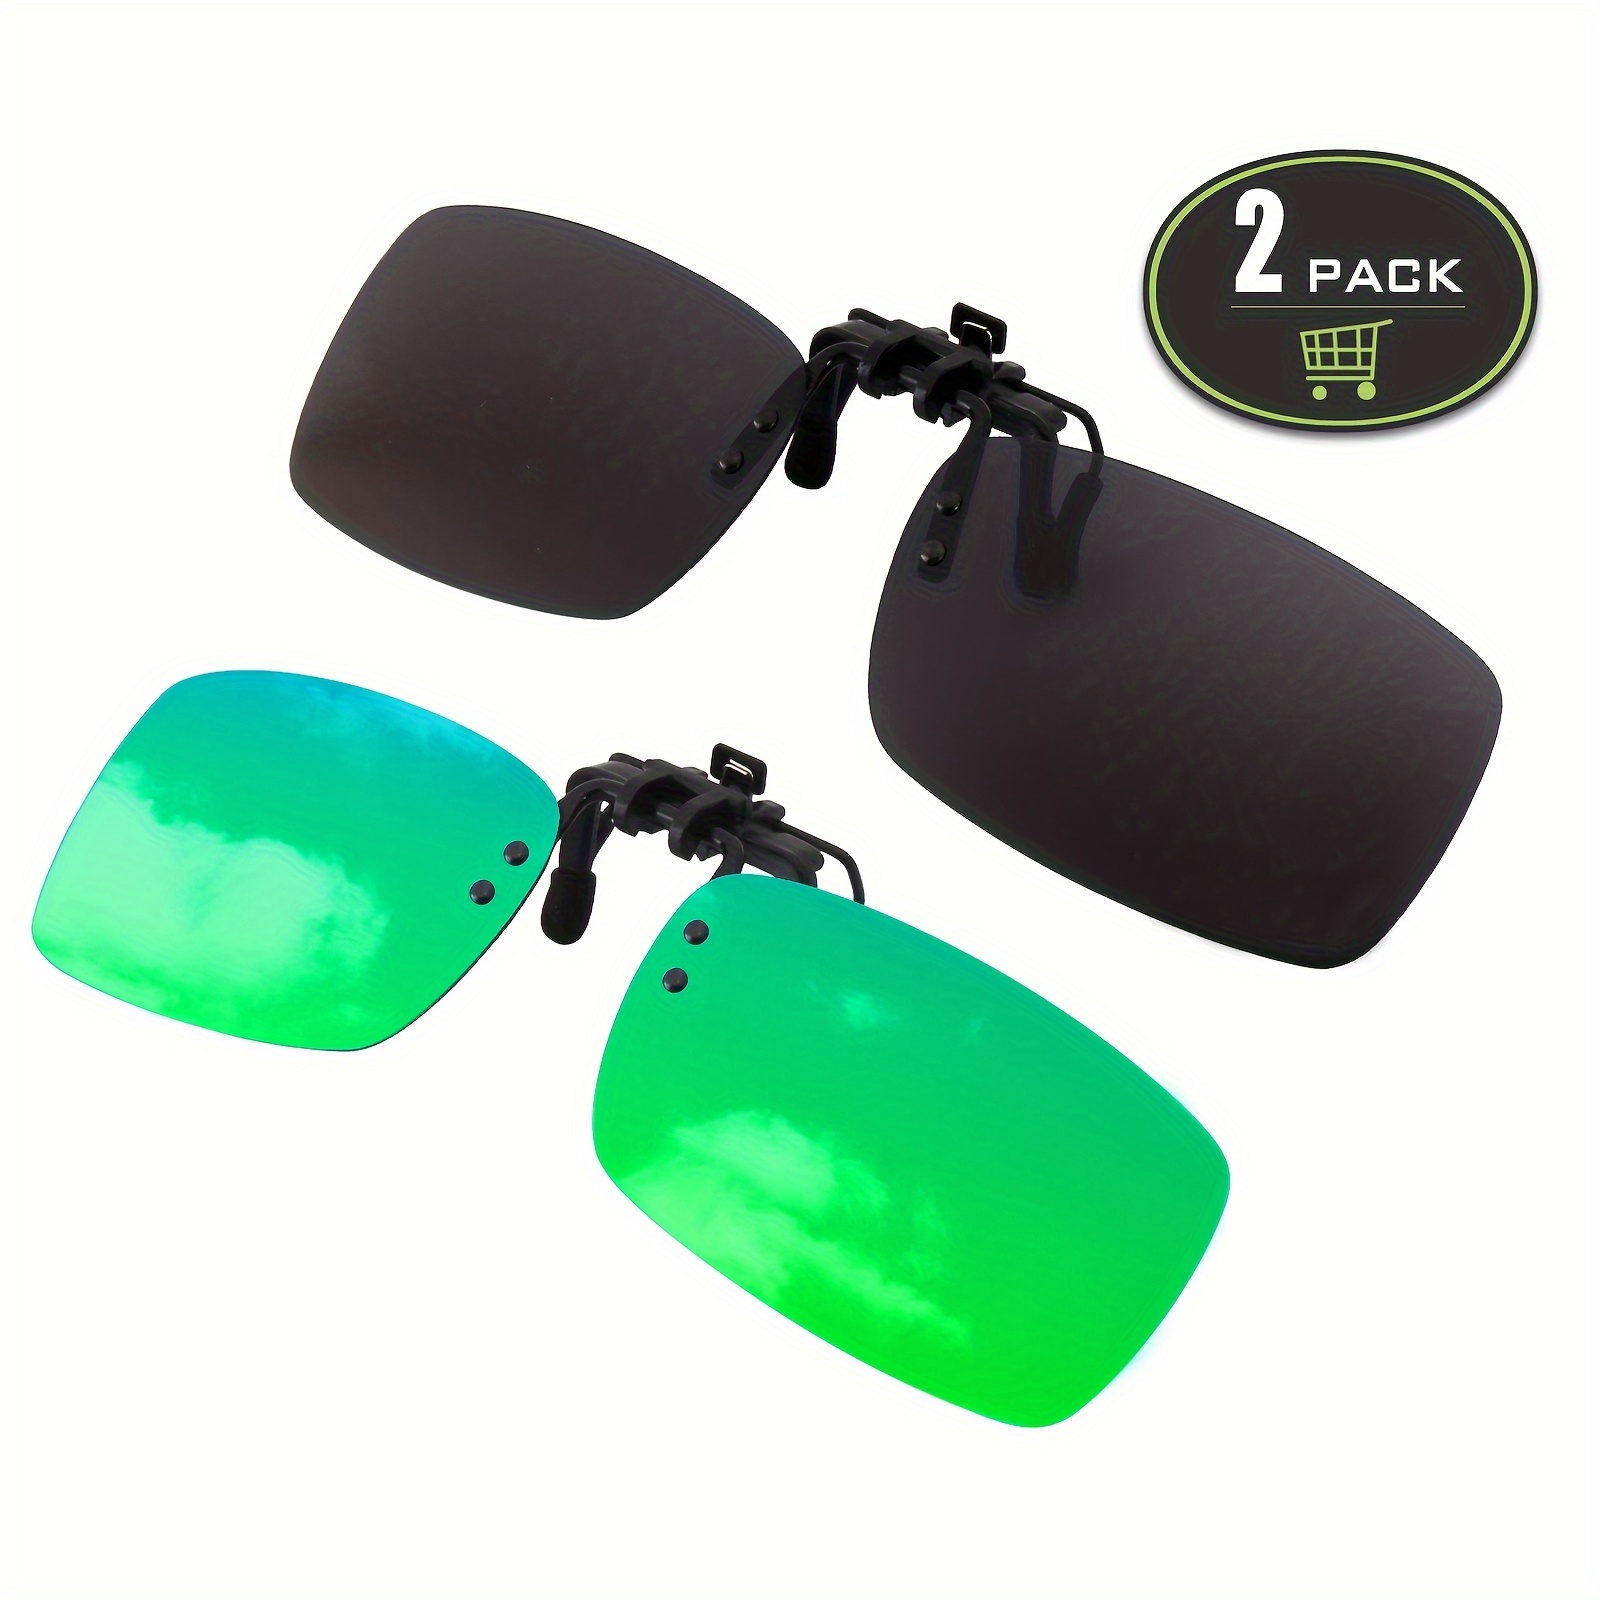 2pcs Trendy Cool Clip On Rectangle Sunglasses, Polarized Driving Fishing Sunglasses Lens, with Cloth and Pouch, for Men Women Outdoor Sports Party